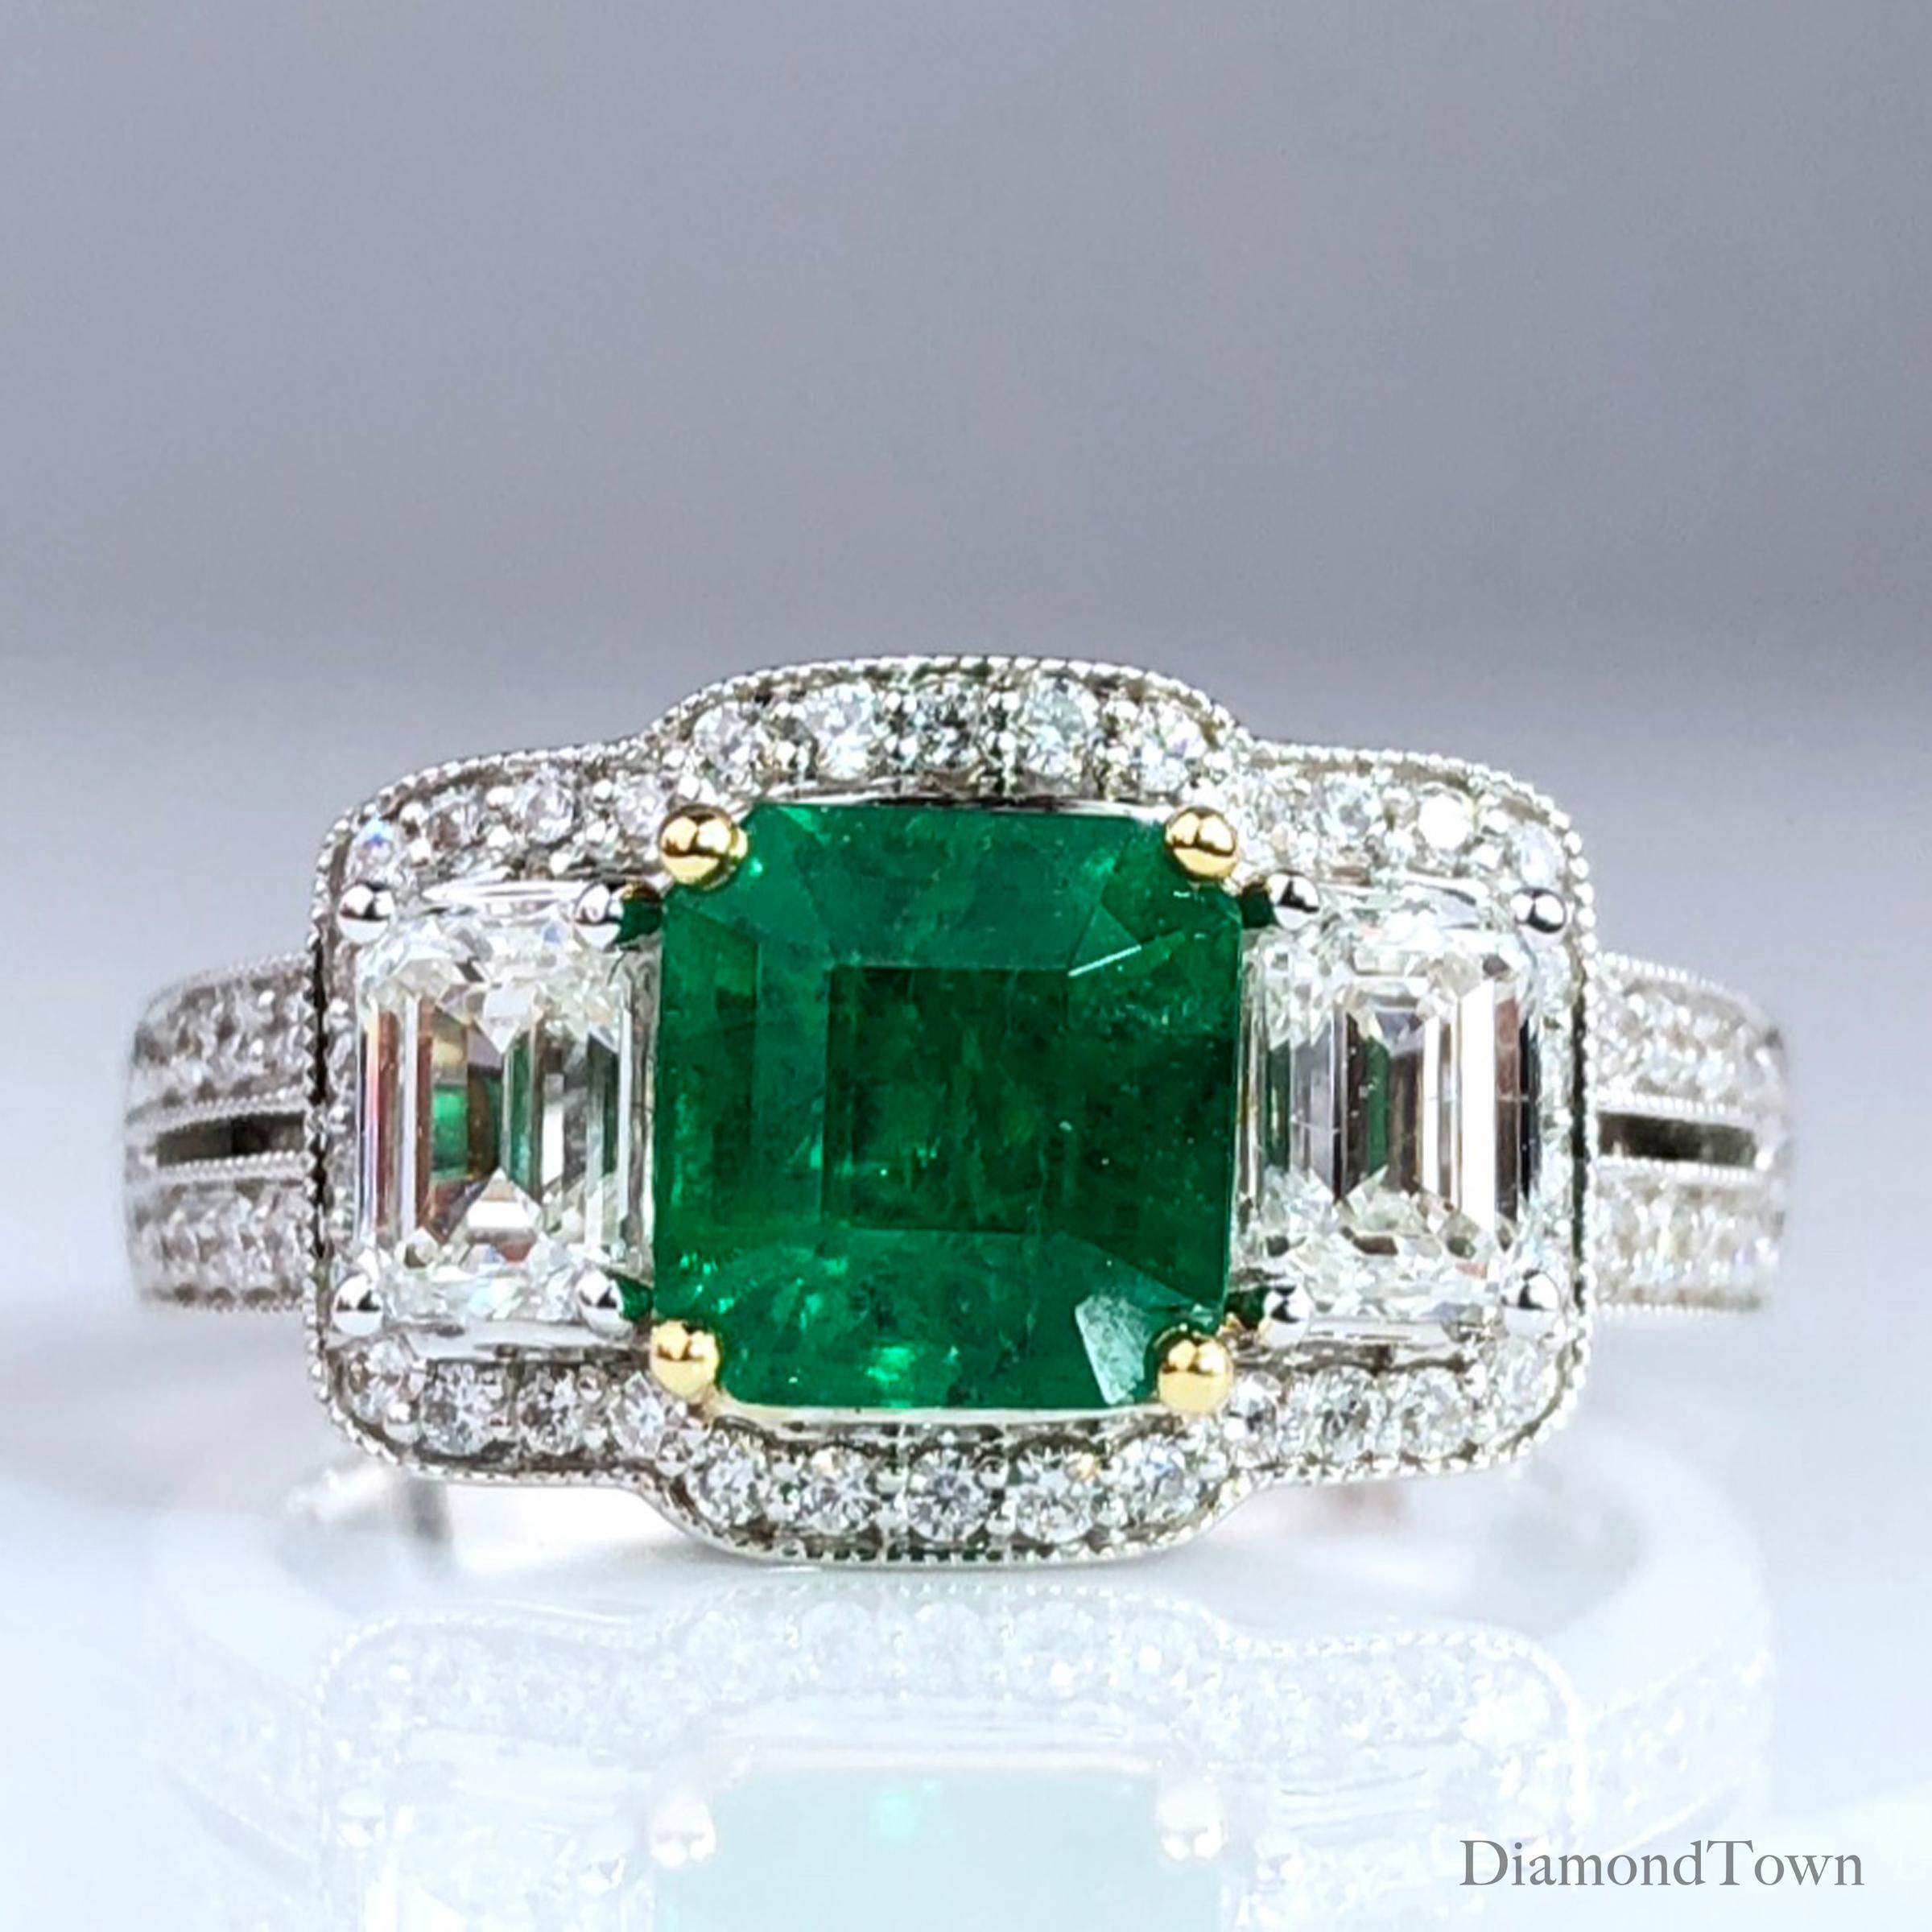 Contemporary 1.10 Carat Cushion Cut Emerald and 1.03 Carat Natural Diamond Ring in 18K ref942 For Sale